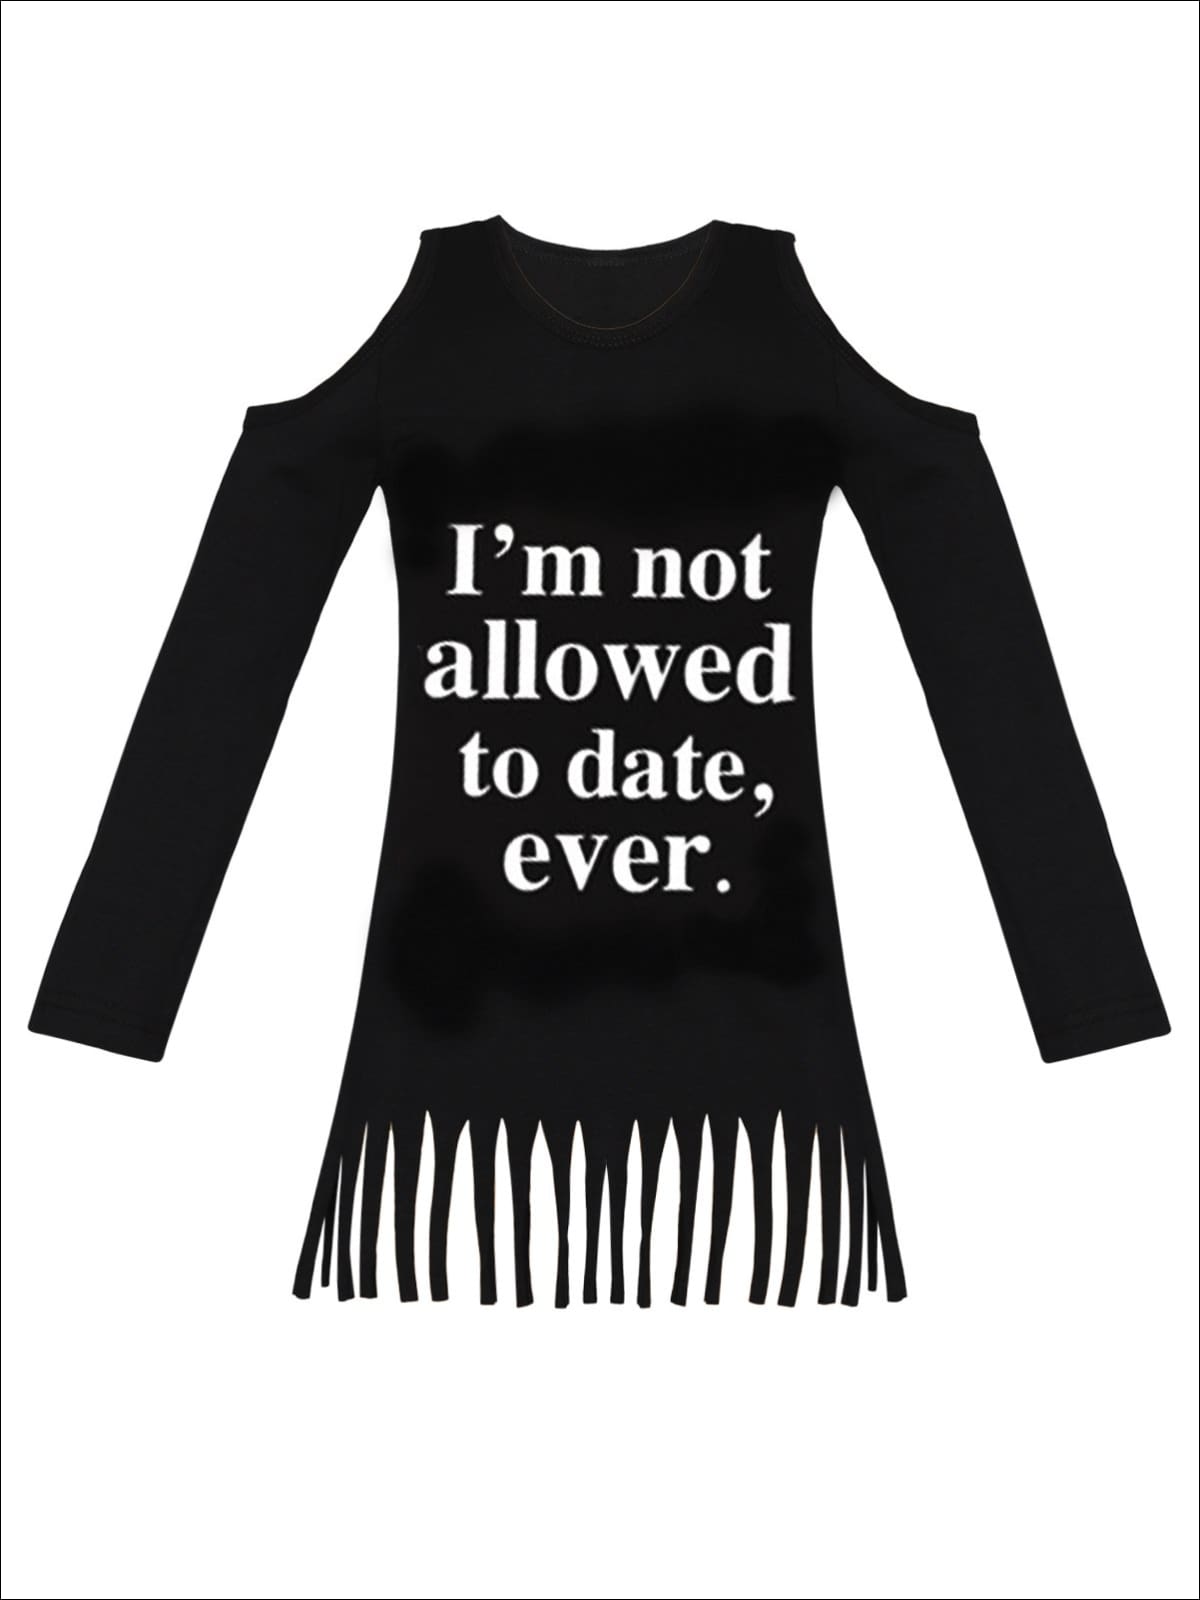 Girls Im Not Allowed to Date Ever Cold Shoulder Fringe Graphic Statement Top - Black / 2T/3T - Girls Fall Top